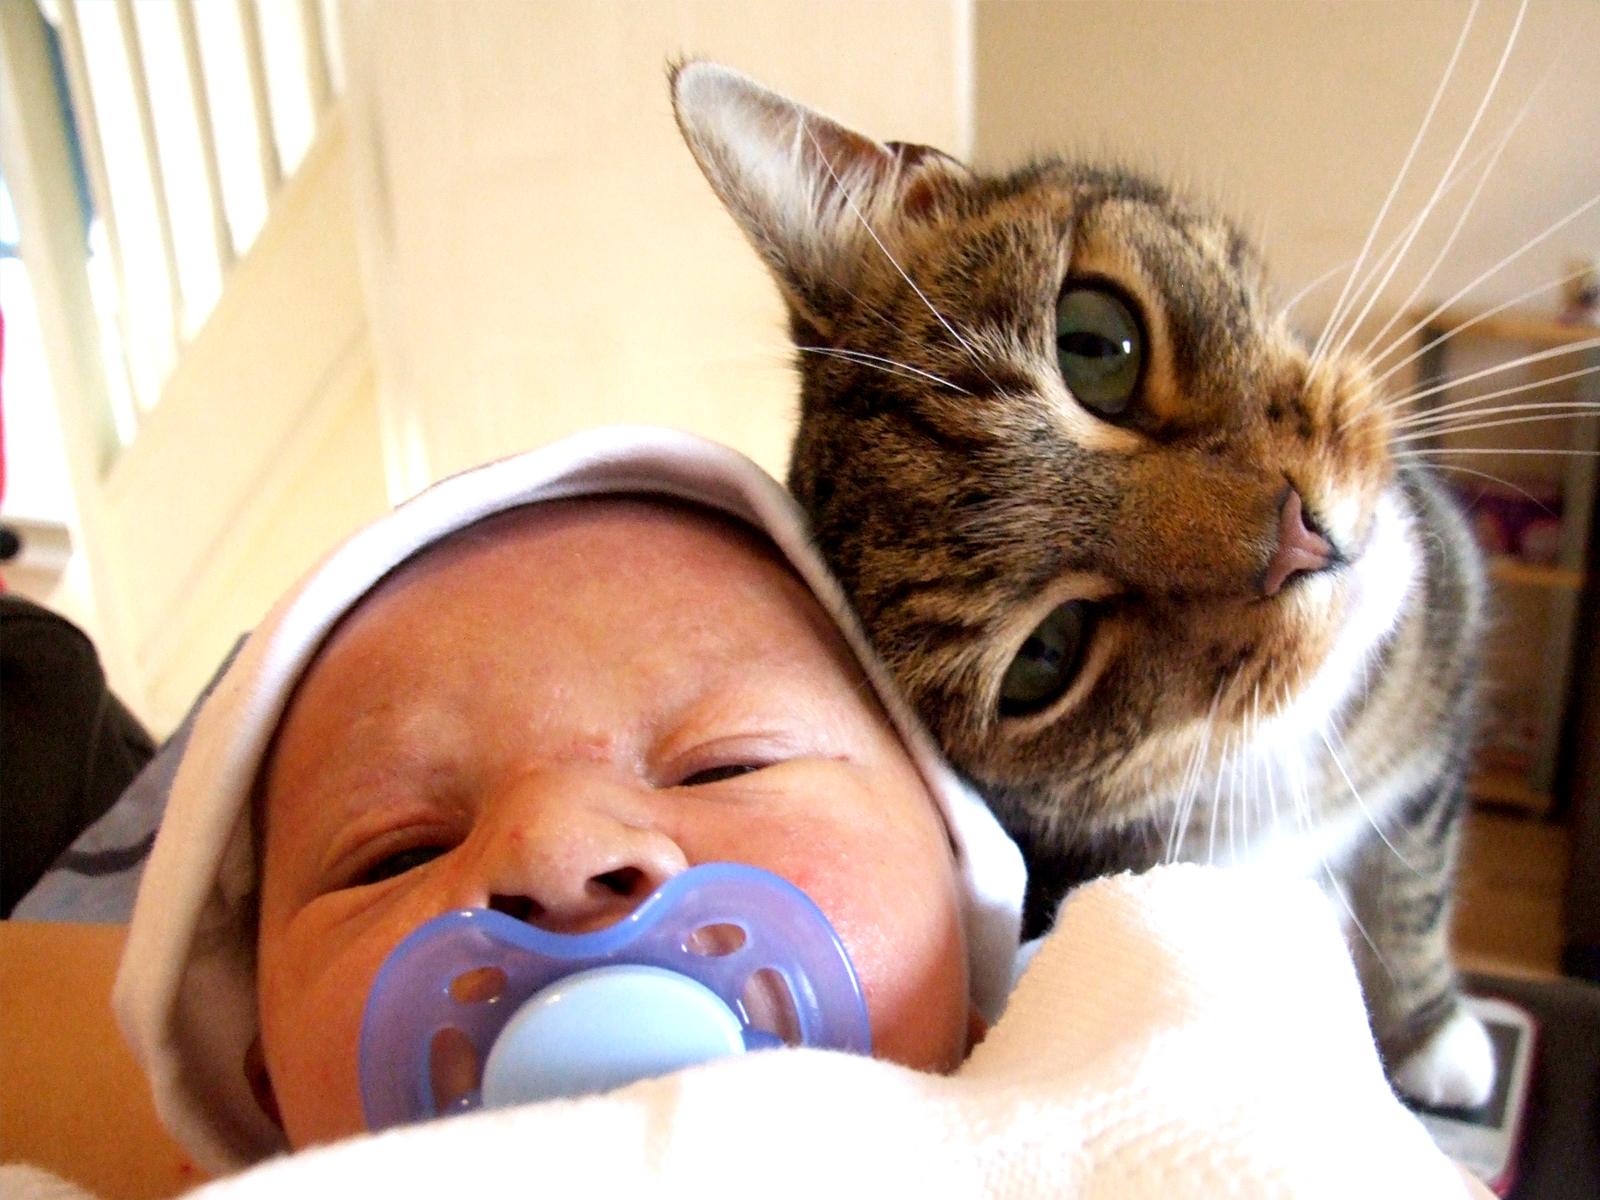 baby and cat with faces close together